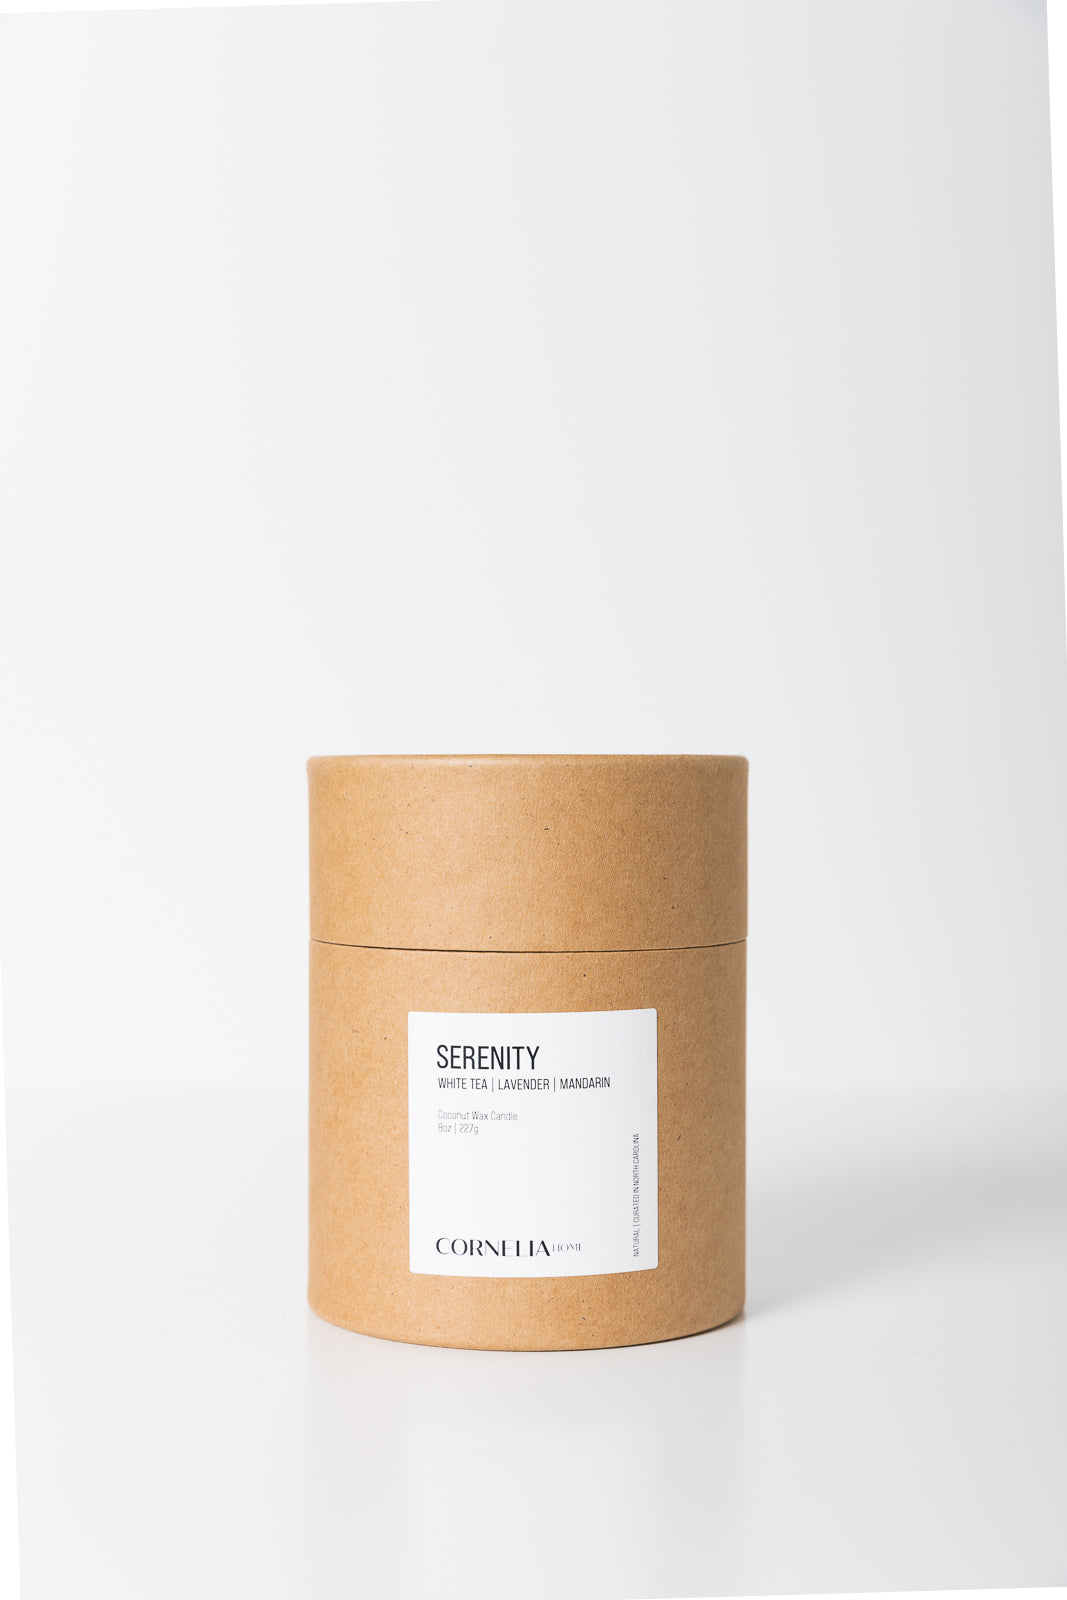 'Serenity' - Candle